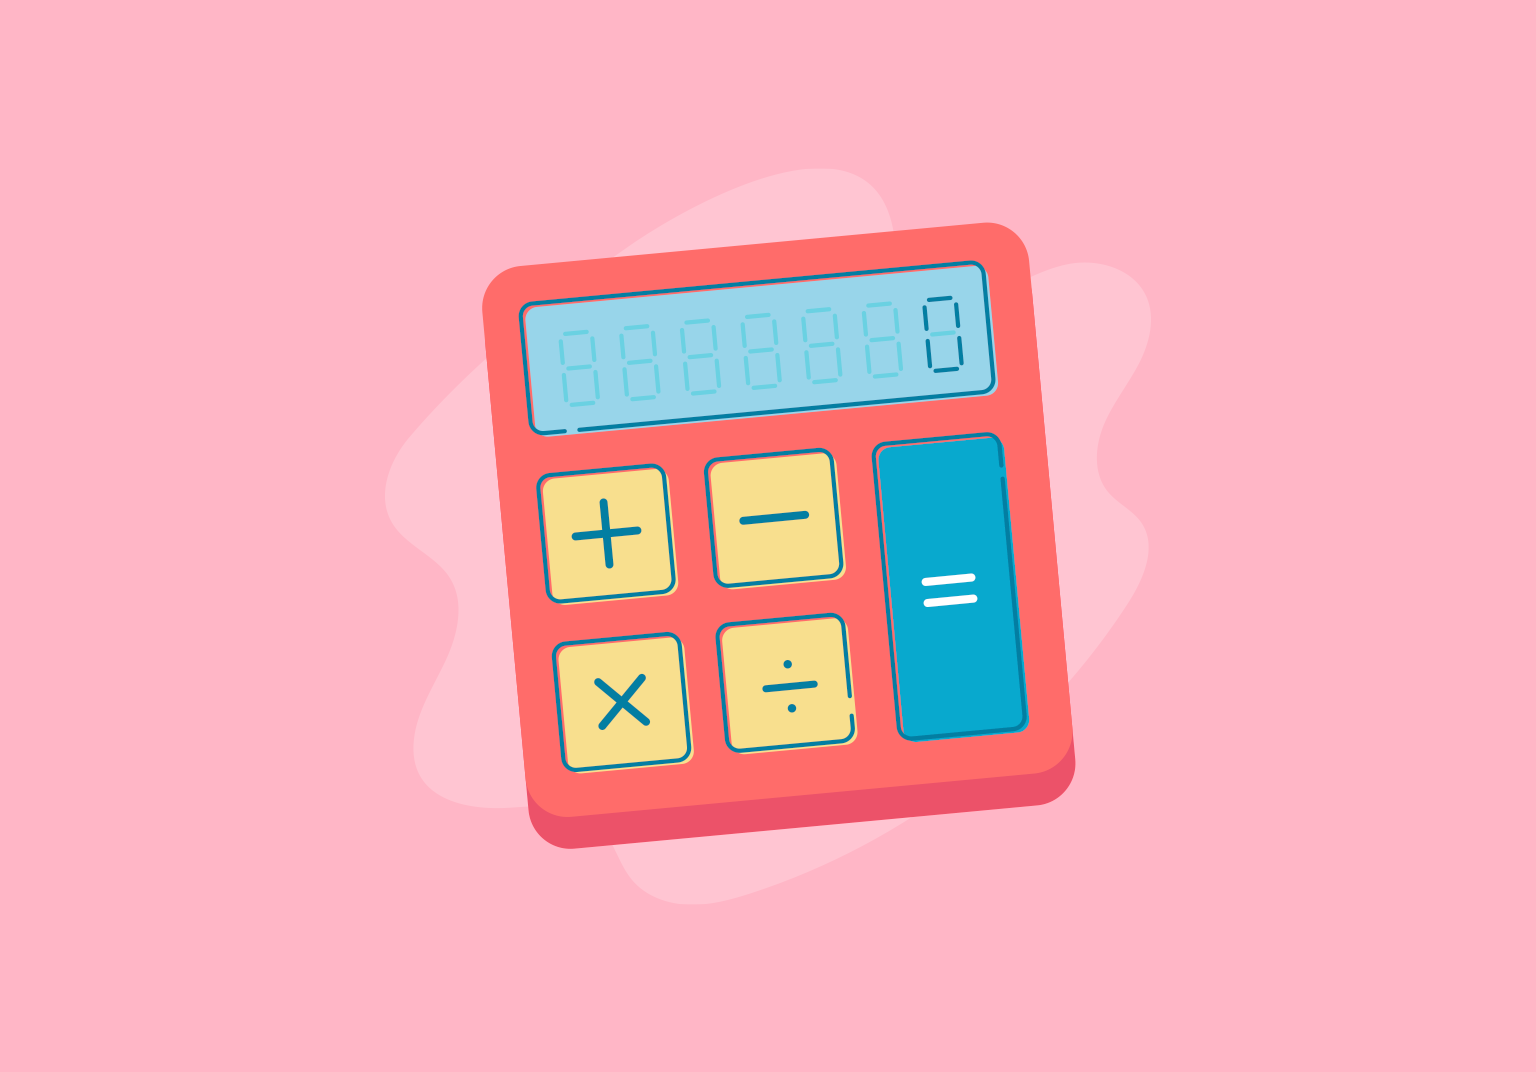 A red calculator on a pink background